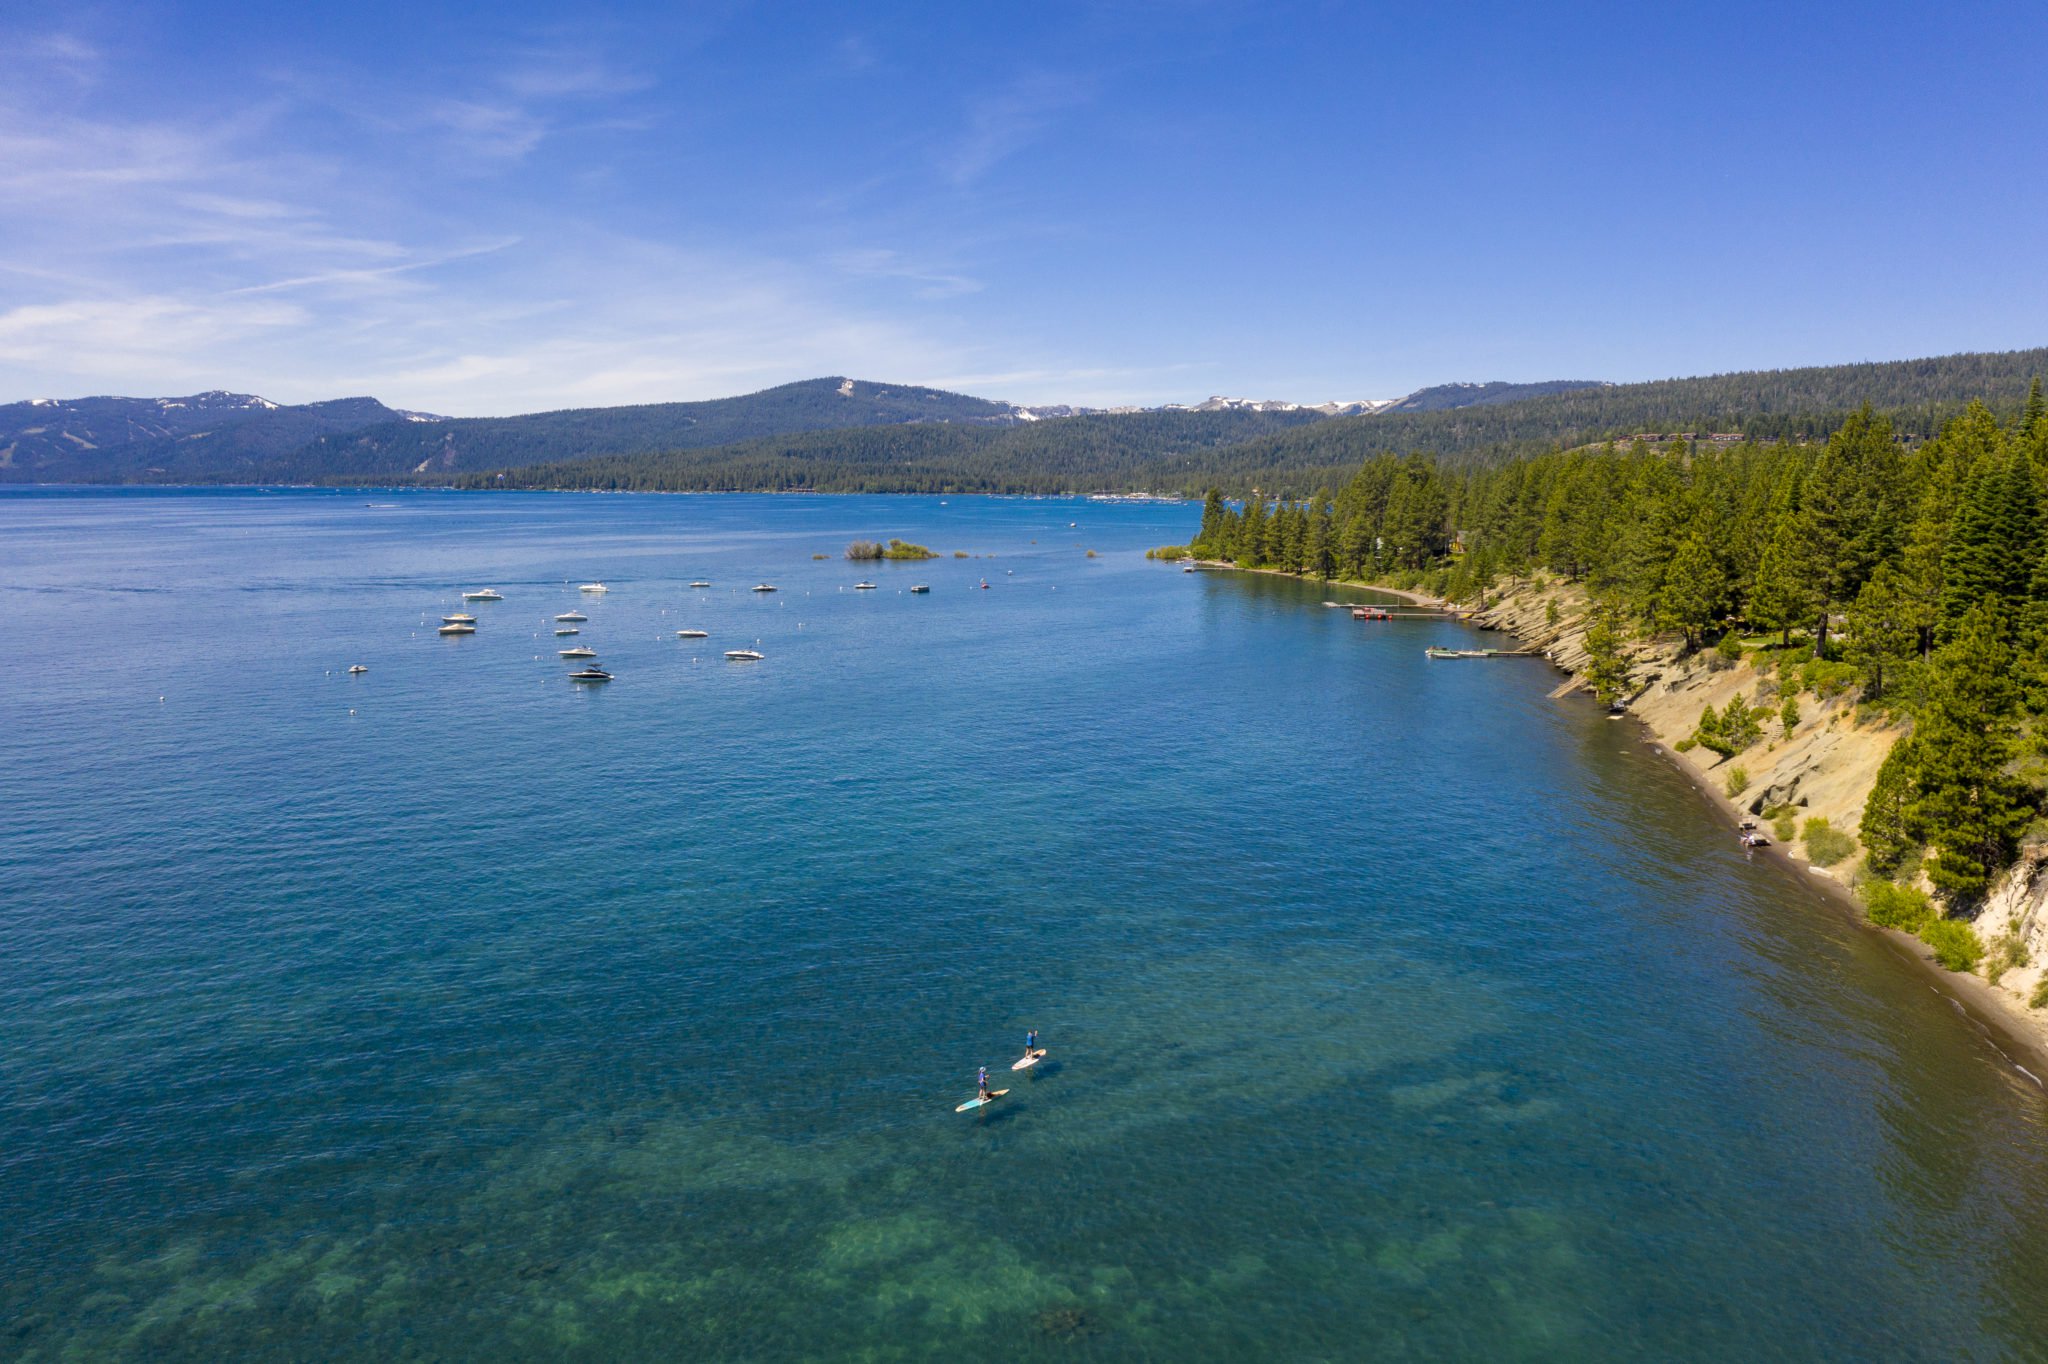 Paddleboarding is popular on Lake Tahoe in the summer